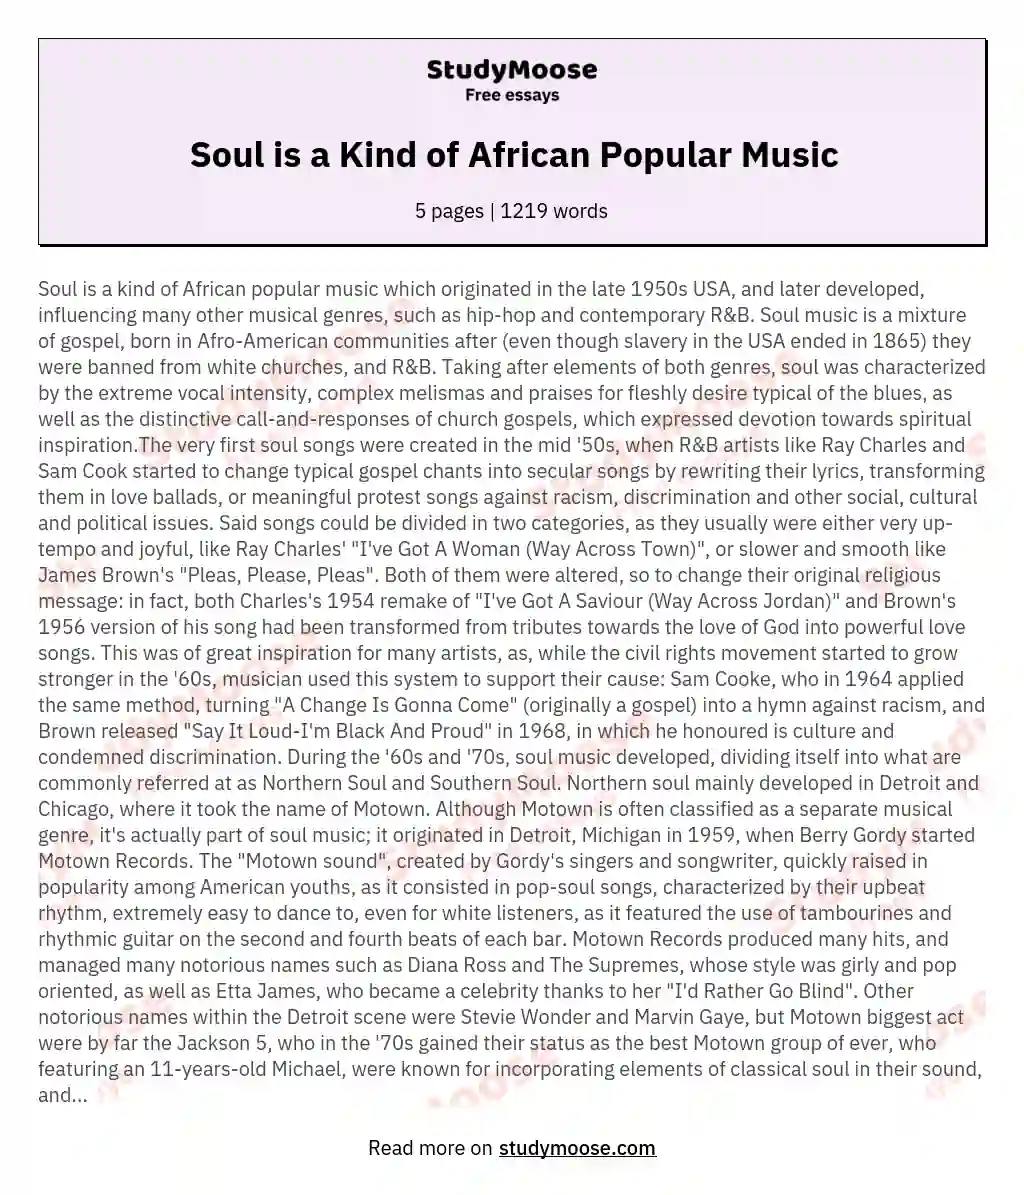 Soul is a Kind of African Popular Music essay